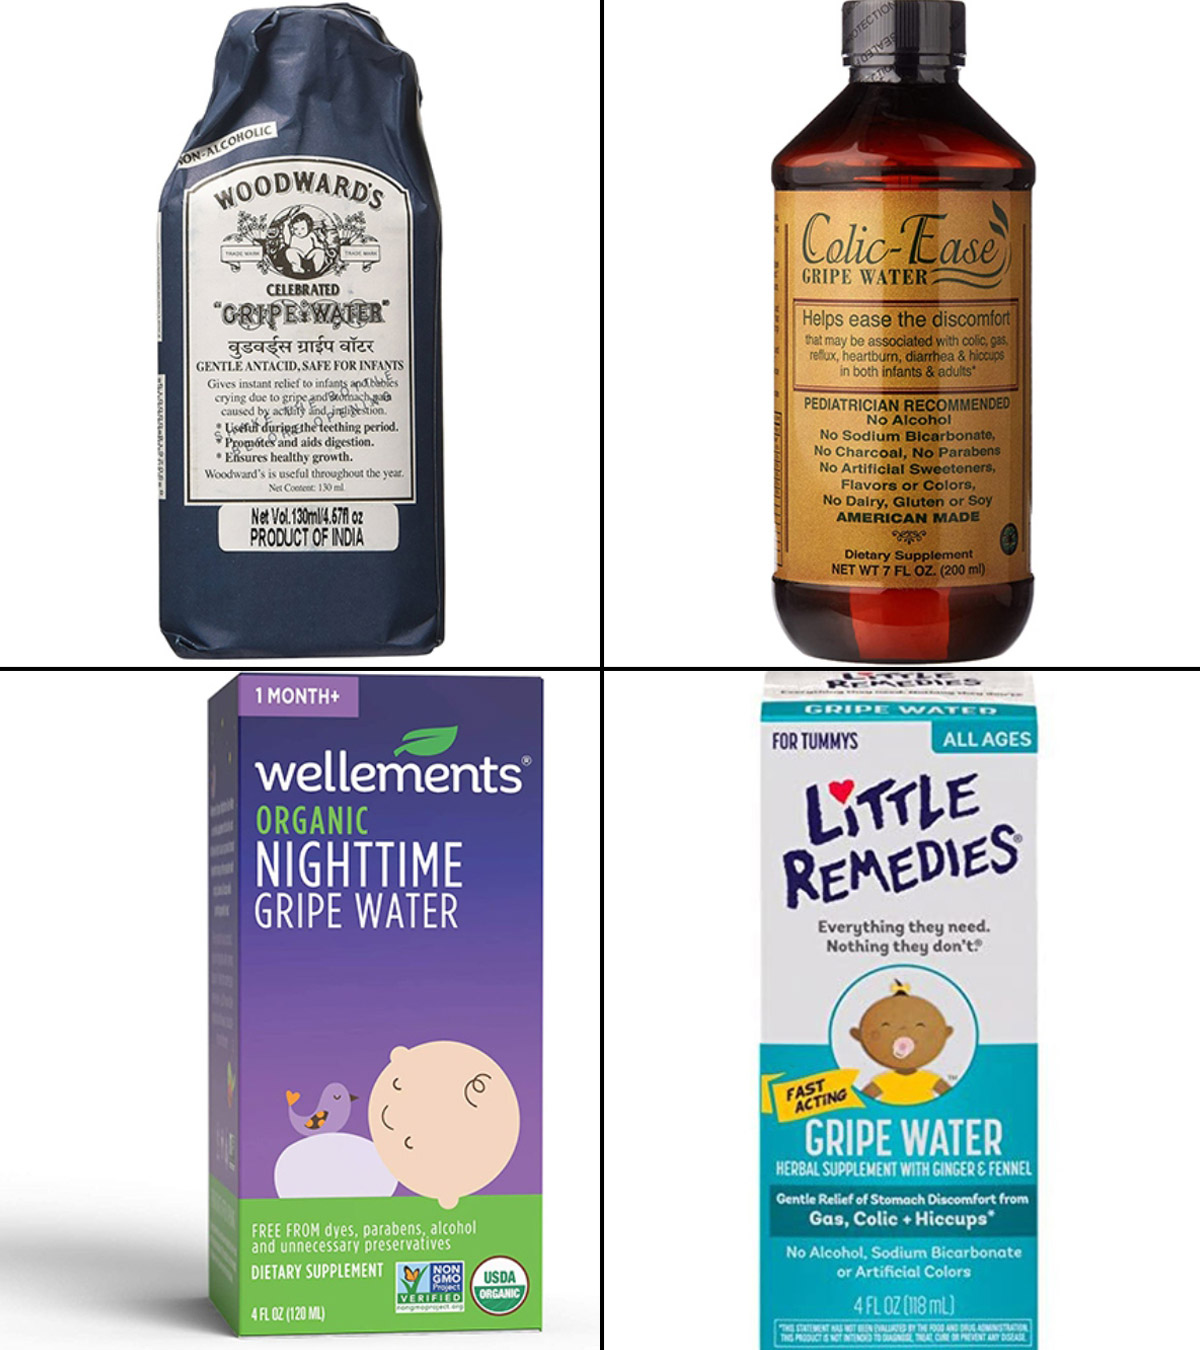 3 Bottles - Woodwards Gripe Water Colic Baby Gripewater 130ml